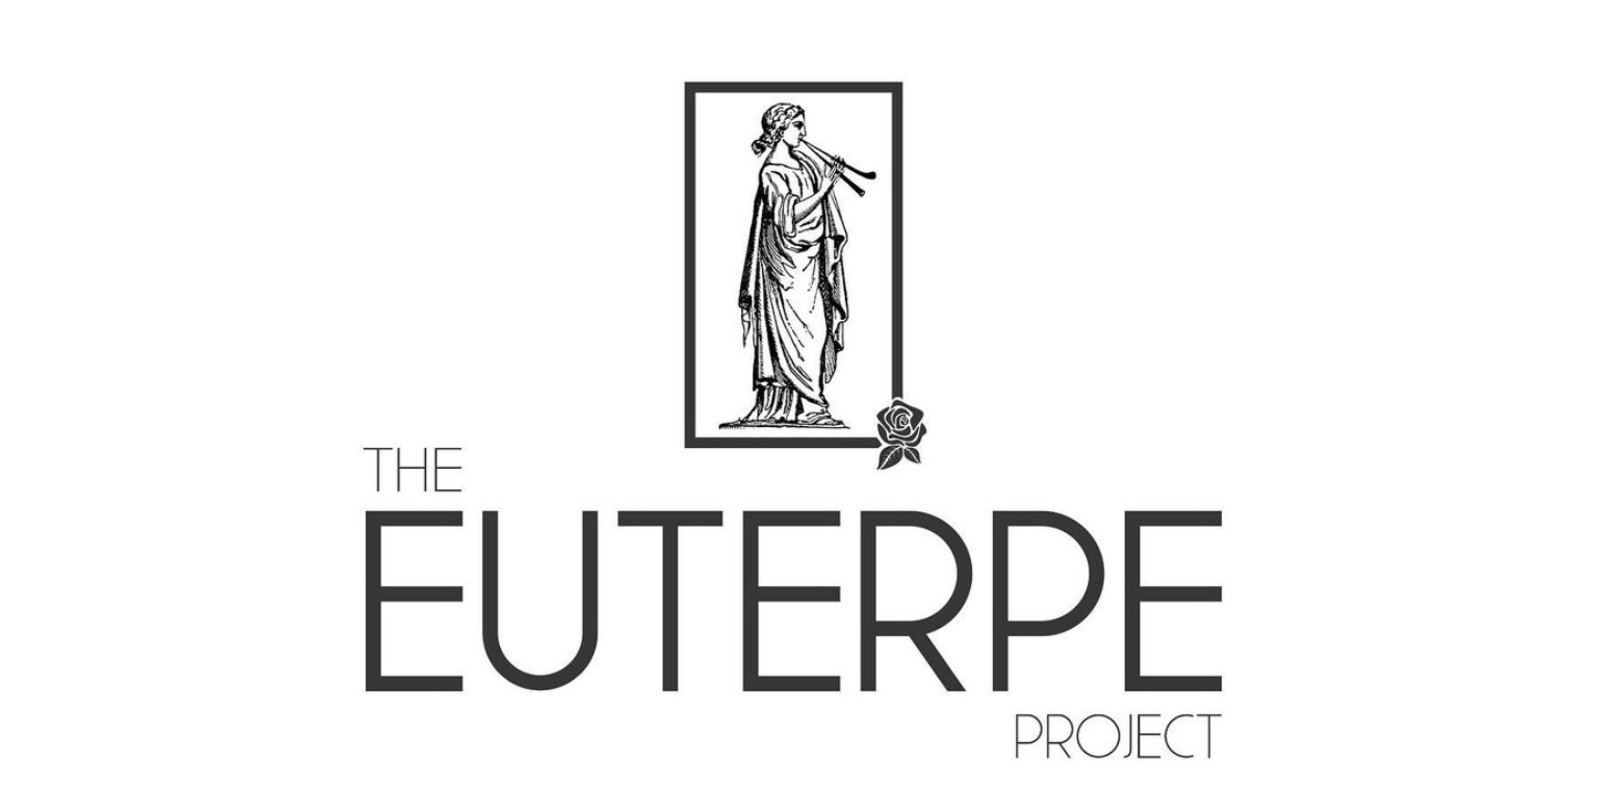 The Euterpe Project's banner